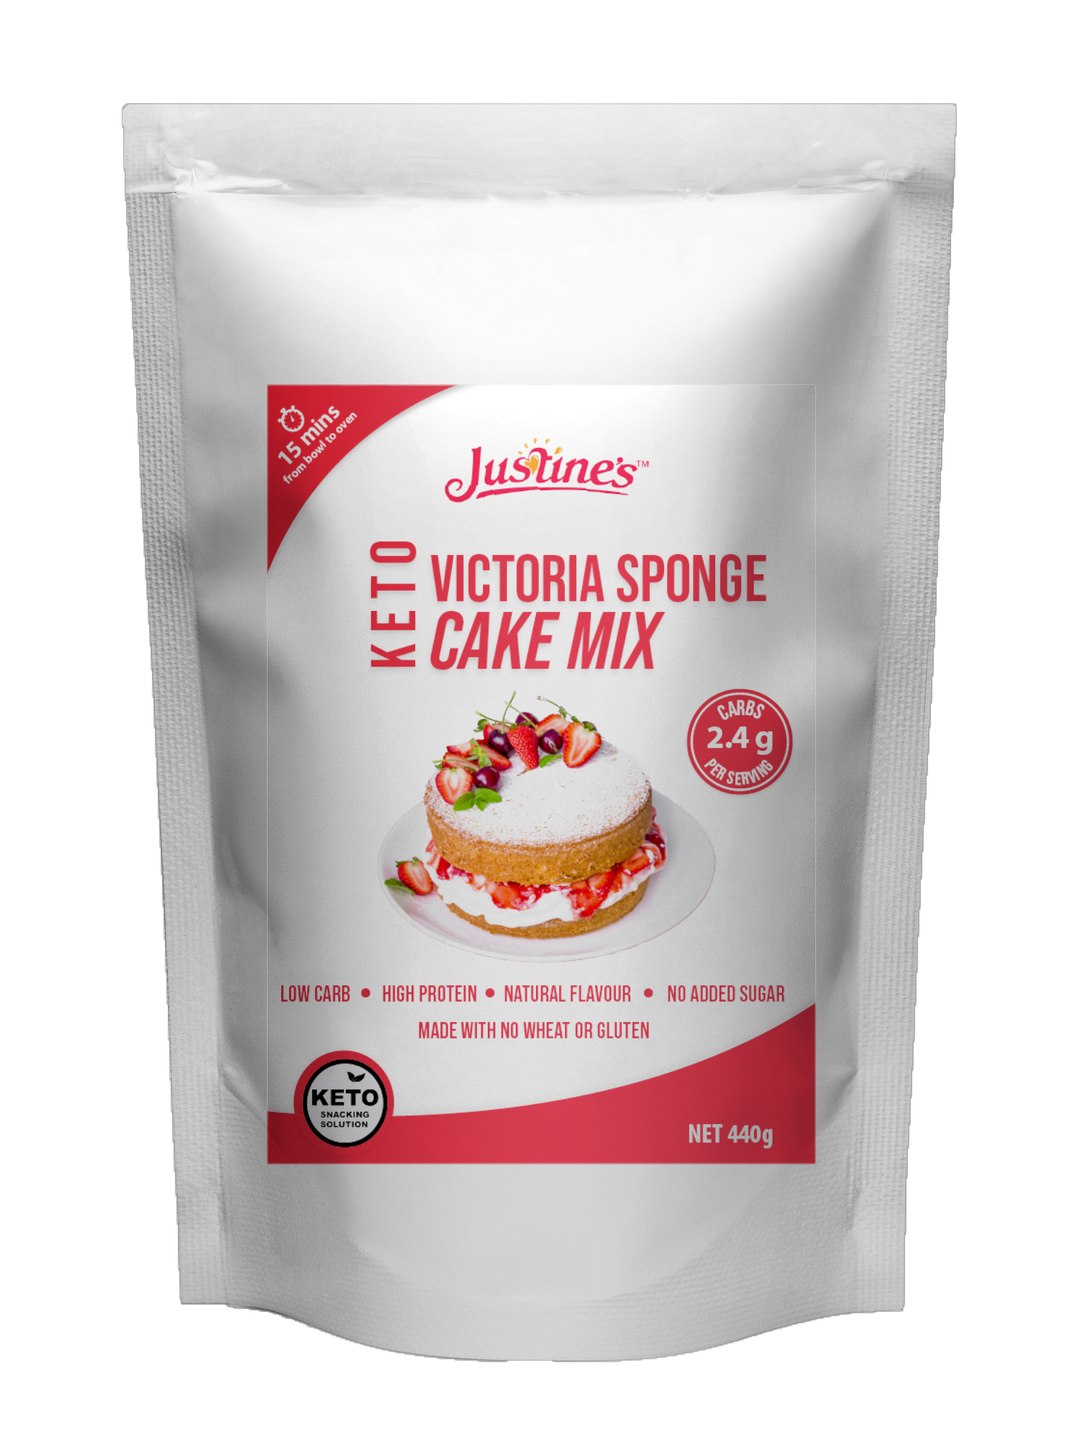 Justine's Low Carb Keto Victoria Sponge cake - Front pouch